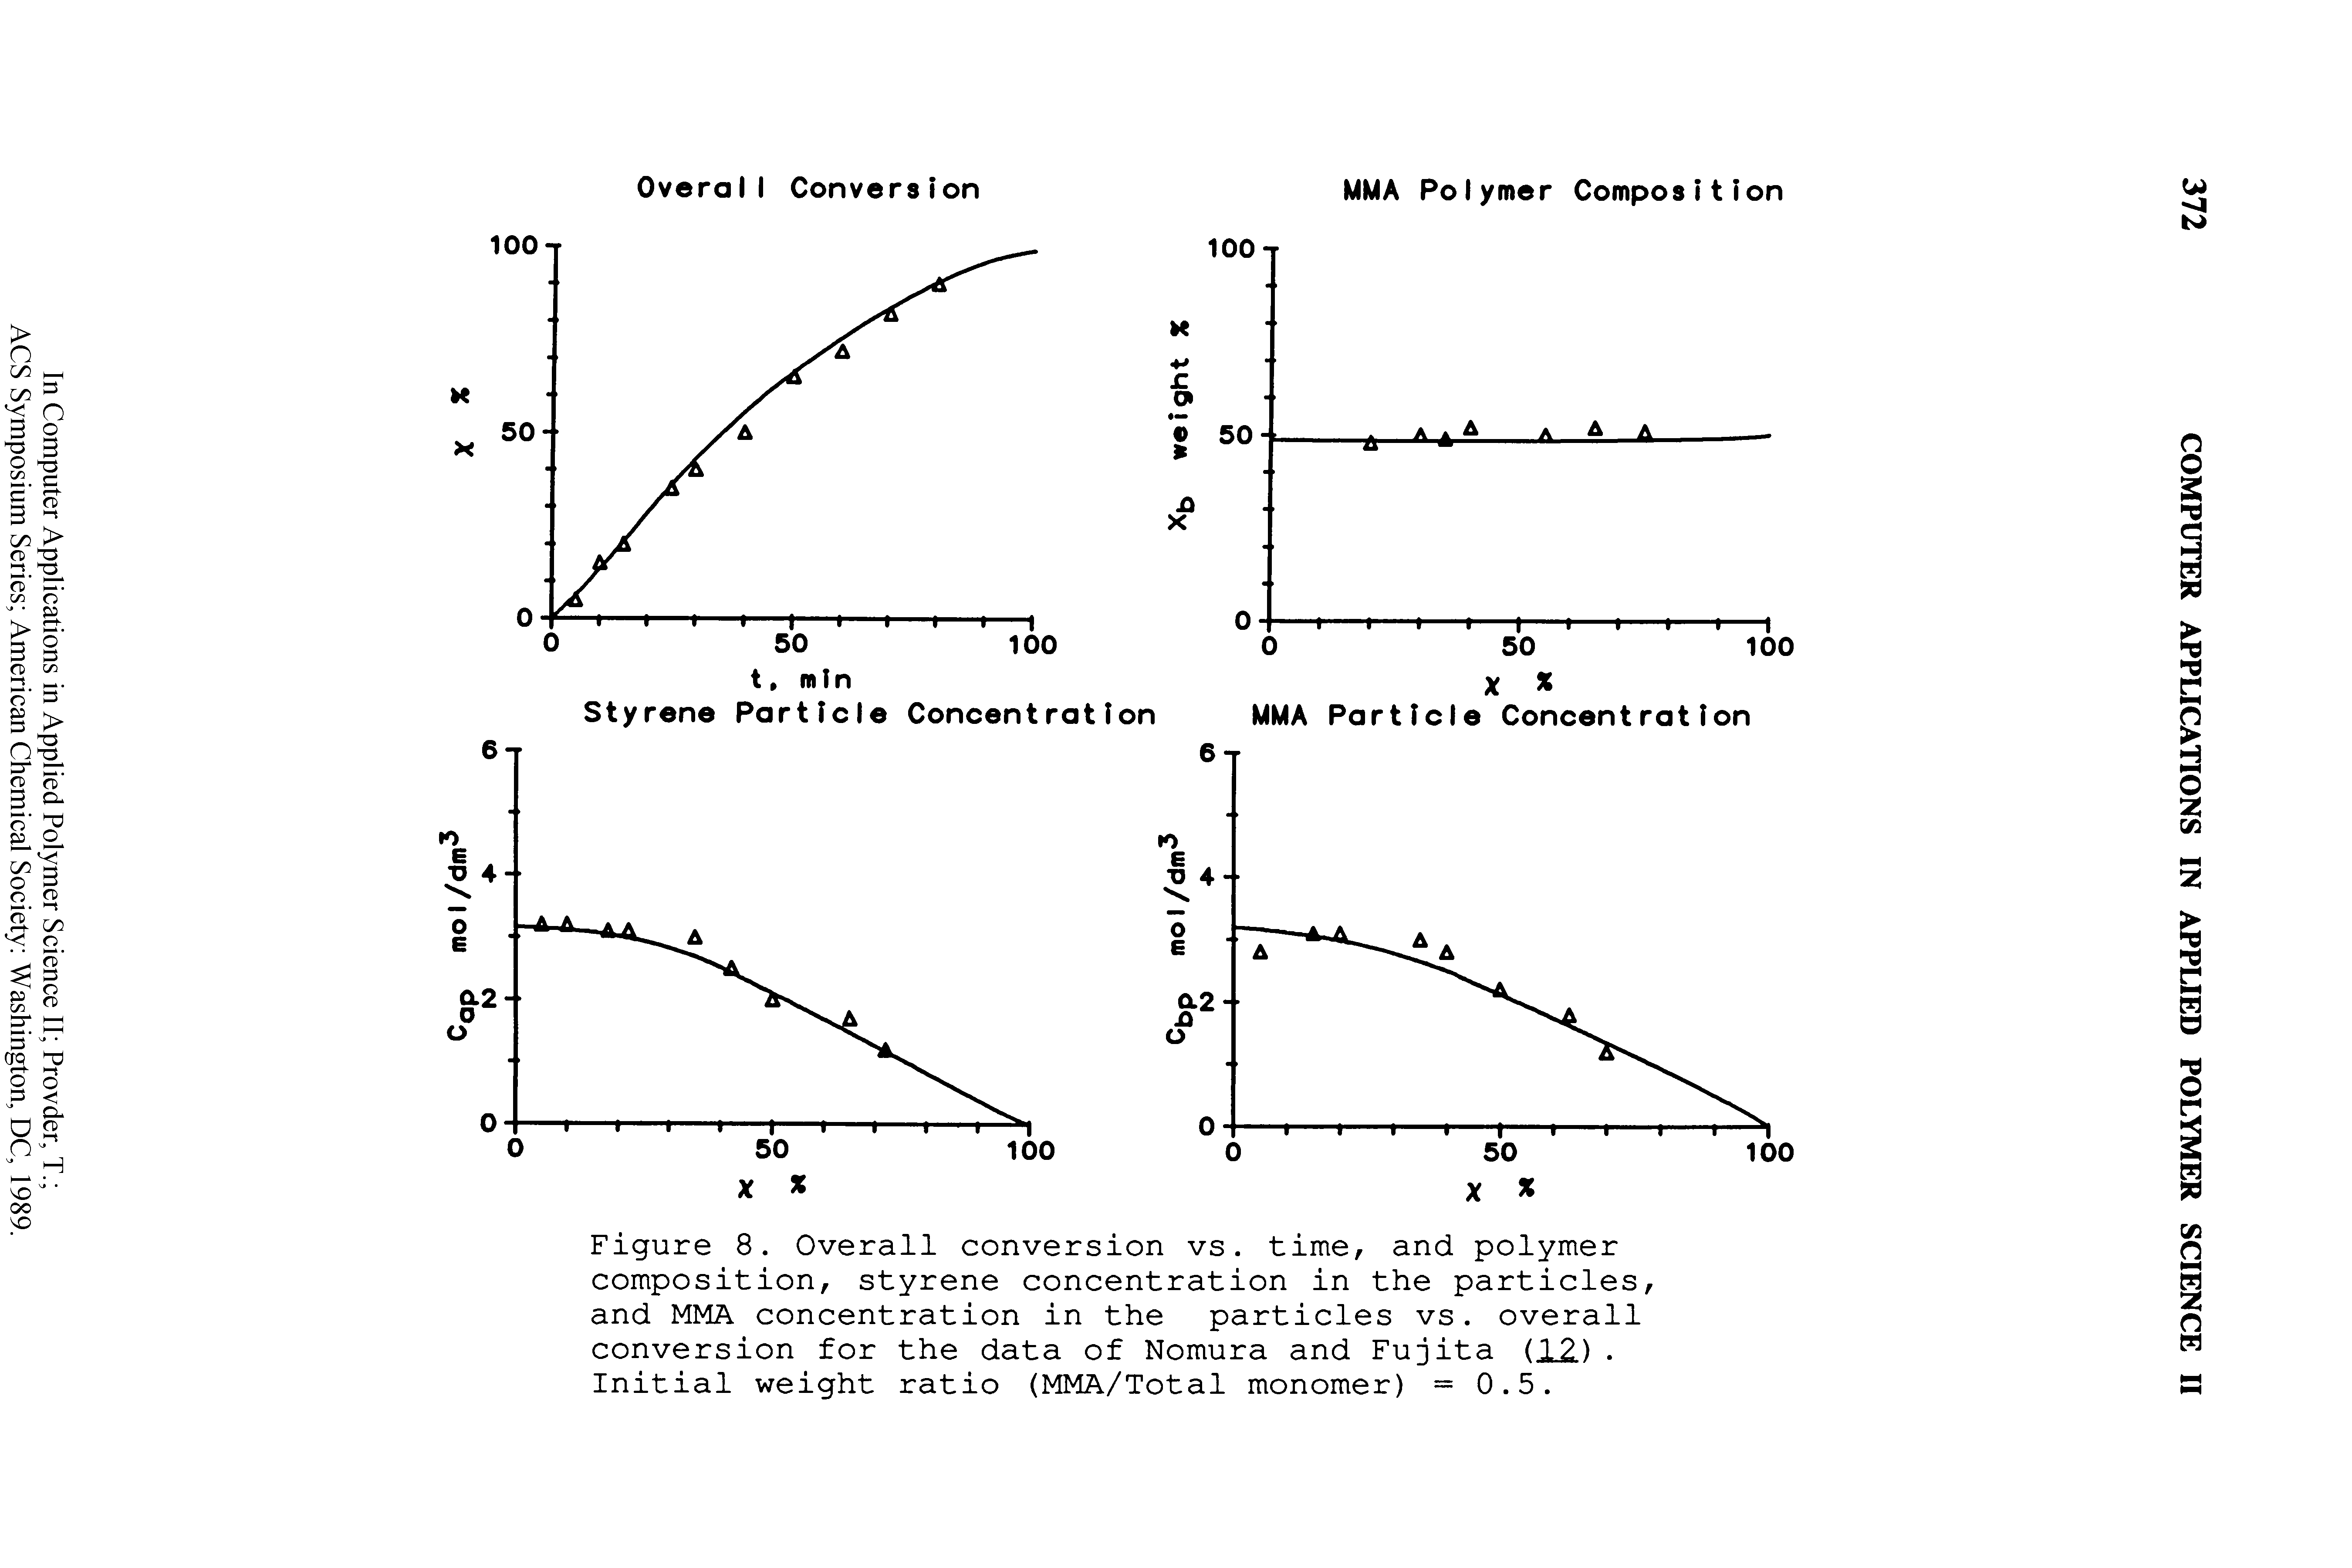 Figure 8. Overall conversion vs. time, and polymer composition, styrene concentration in the particles, and MMA concentration in the particles vs. overall conversion for the data of Nomura and Fujita (12.). Initial weight ratio (MMA/Total monomer) = 0.5.